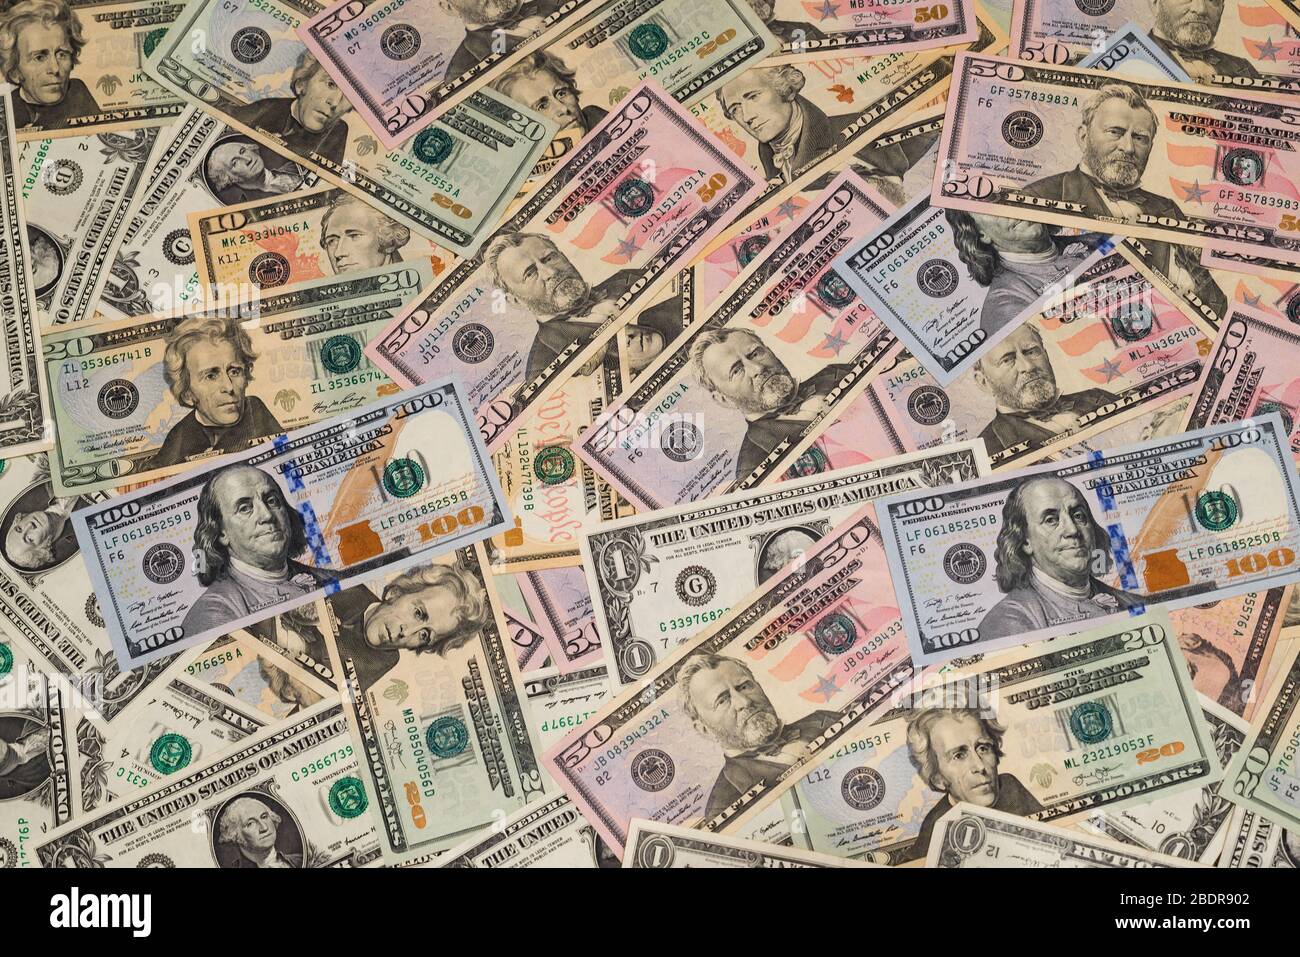 Background from American dollar bills of various denominations and years of issue Stock Photo